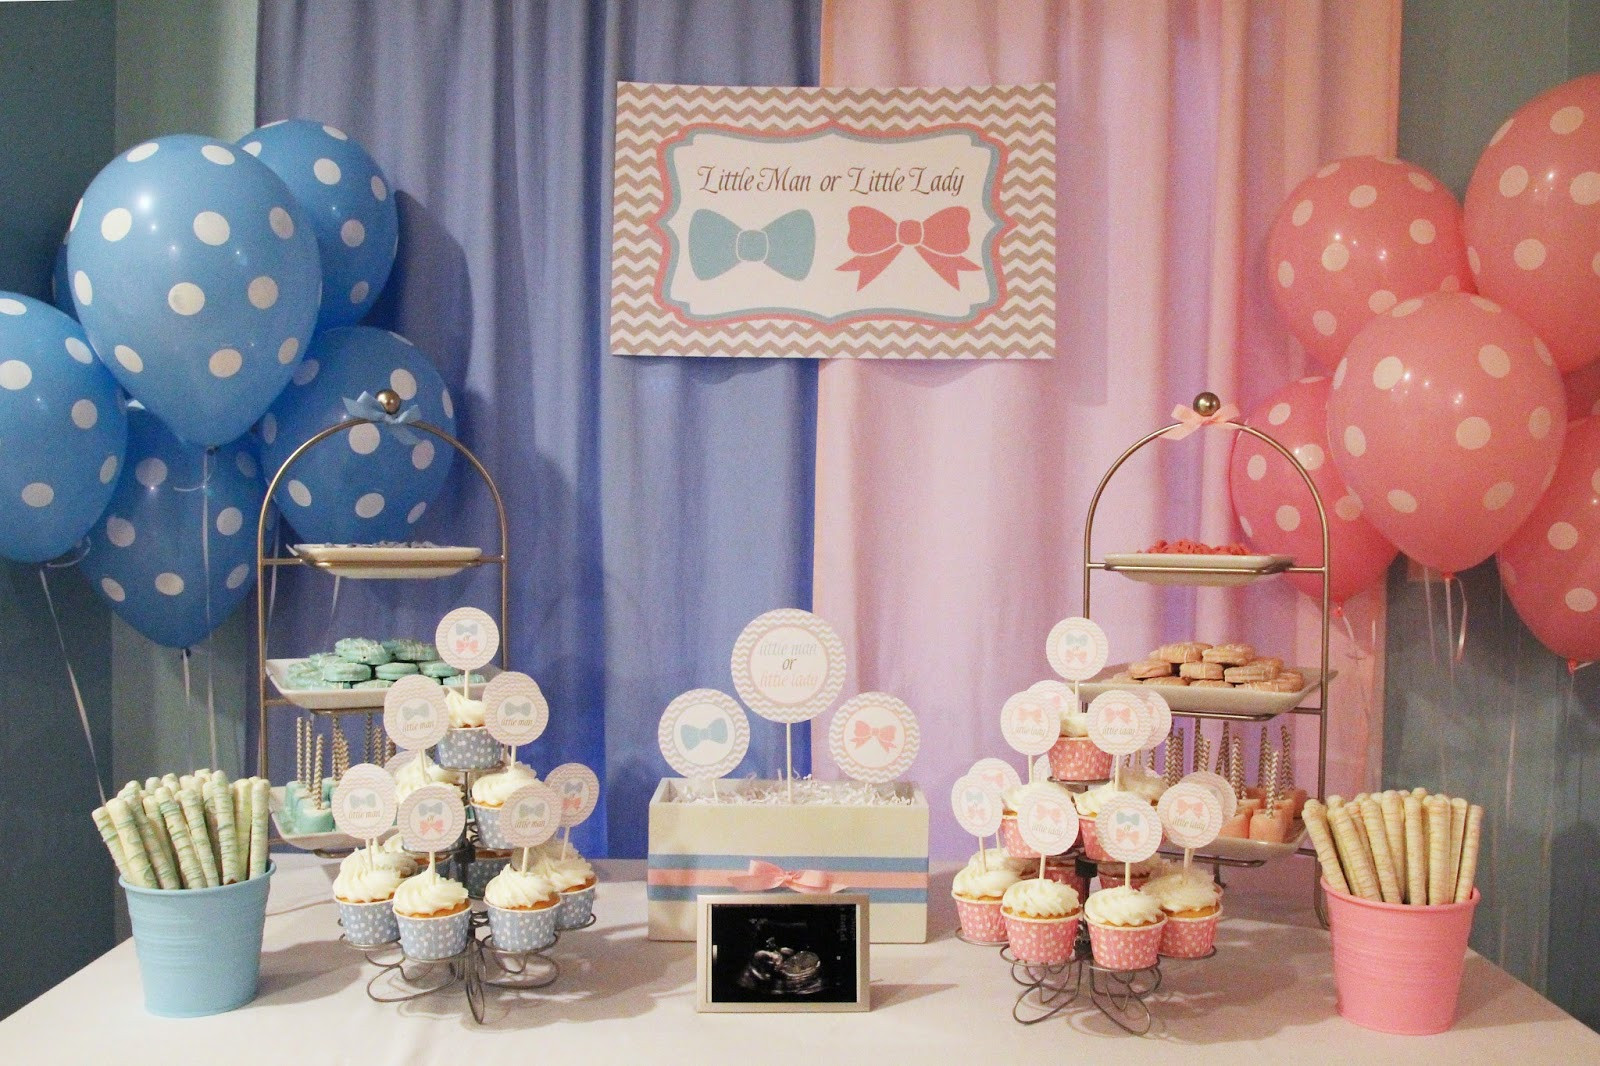 Decoration Ideas For Gender Reveal Party
 5M Creations Gender Reveal Party Little Man or Little Lady